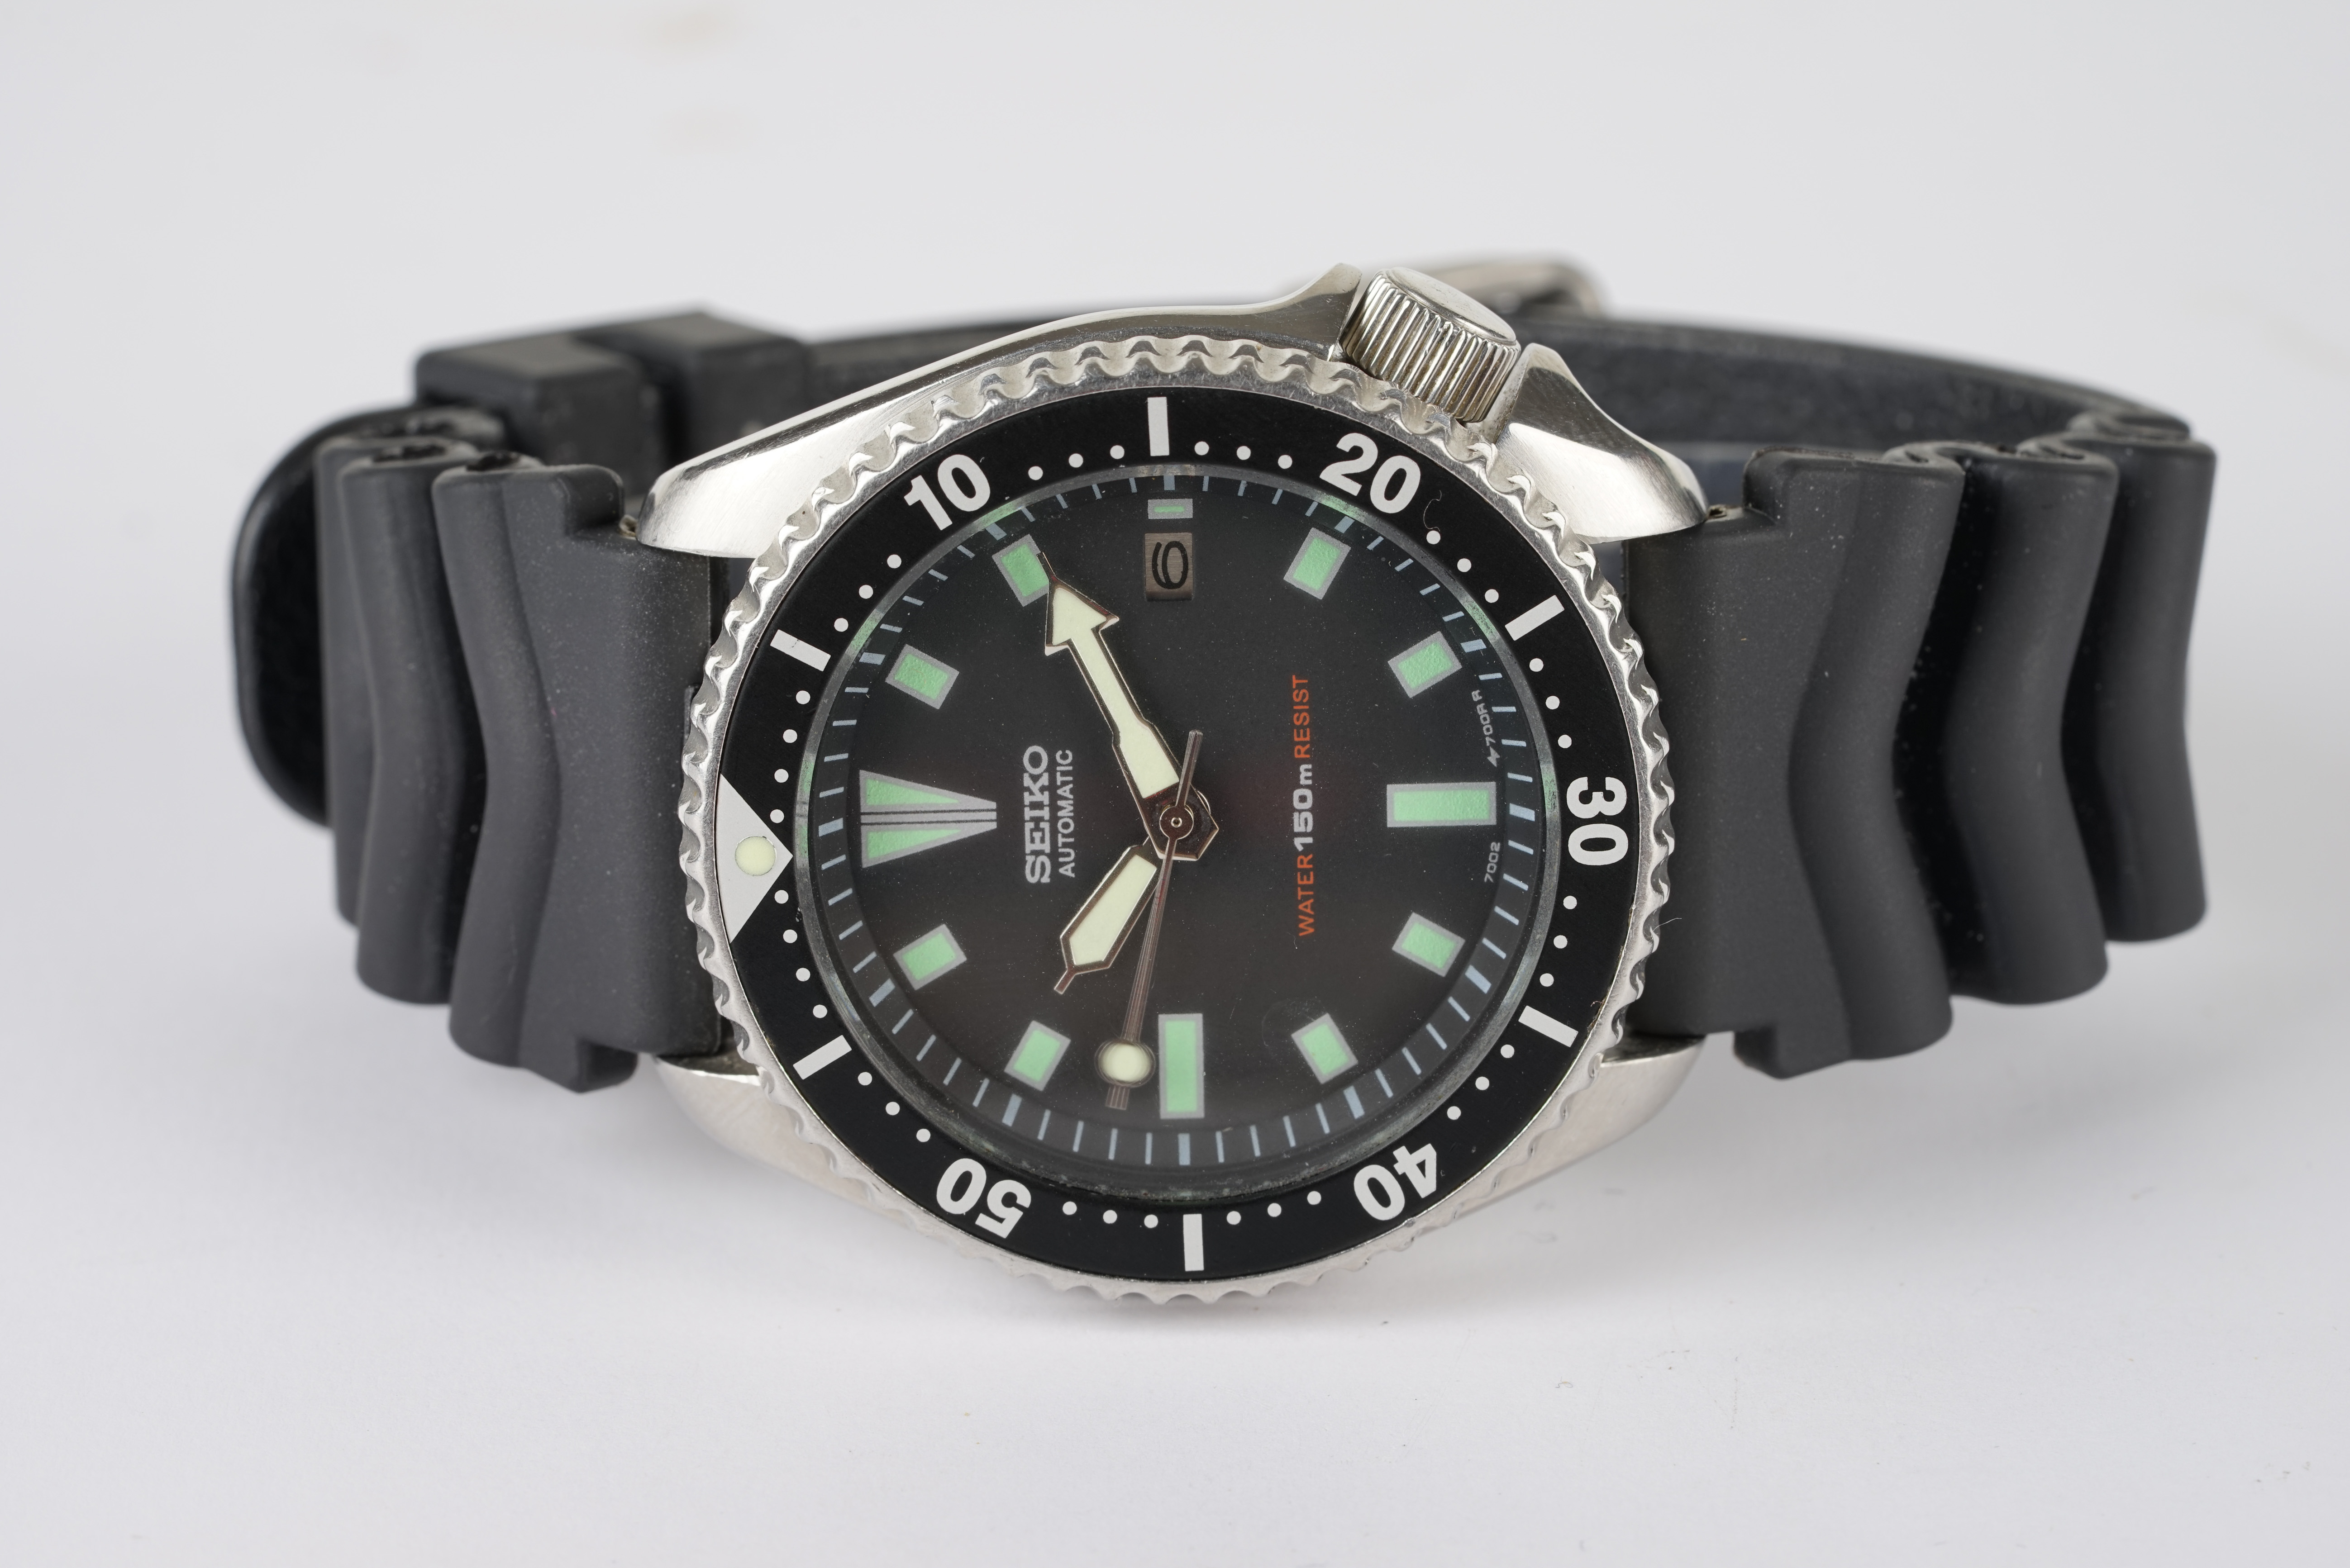 GENTLEMENS SEIKO AUTOMATIC DIVERS WRISTWATCH REF. 7002-7000, circular black dial with lume plot hour